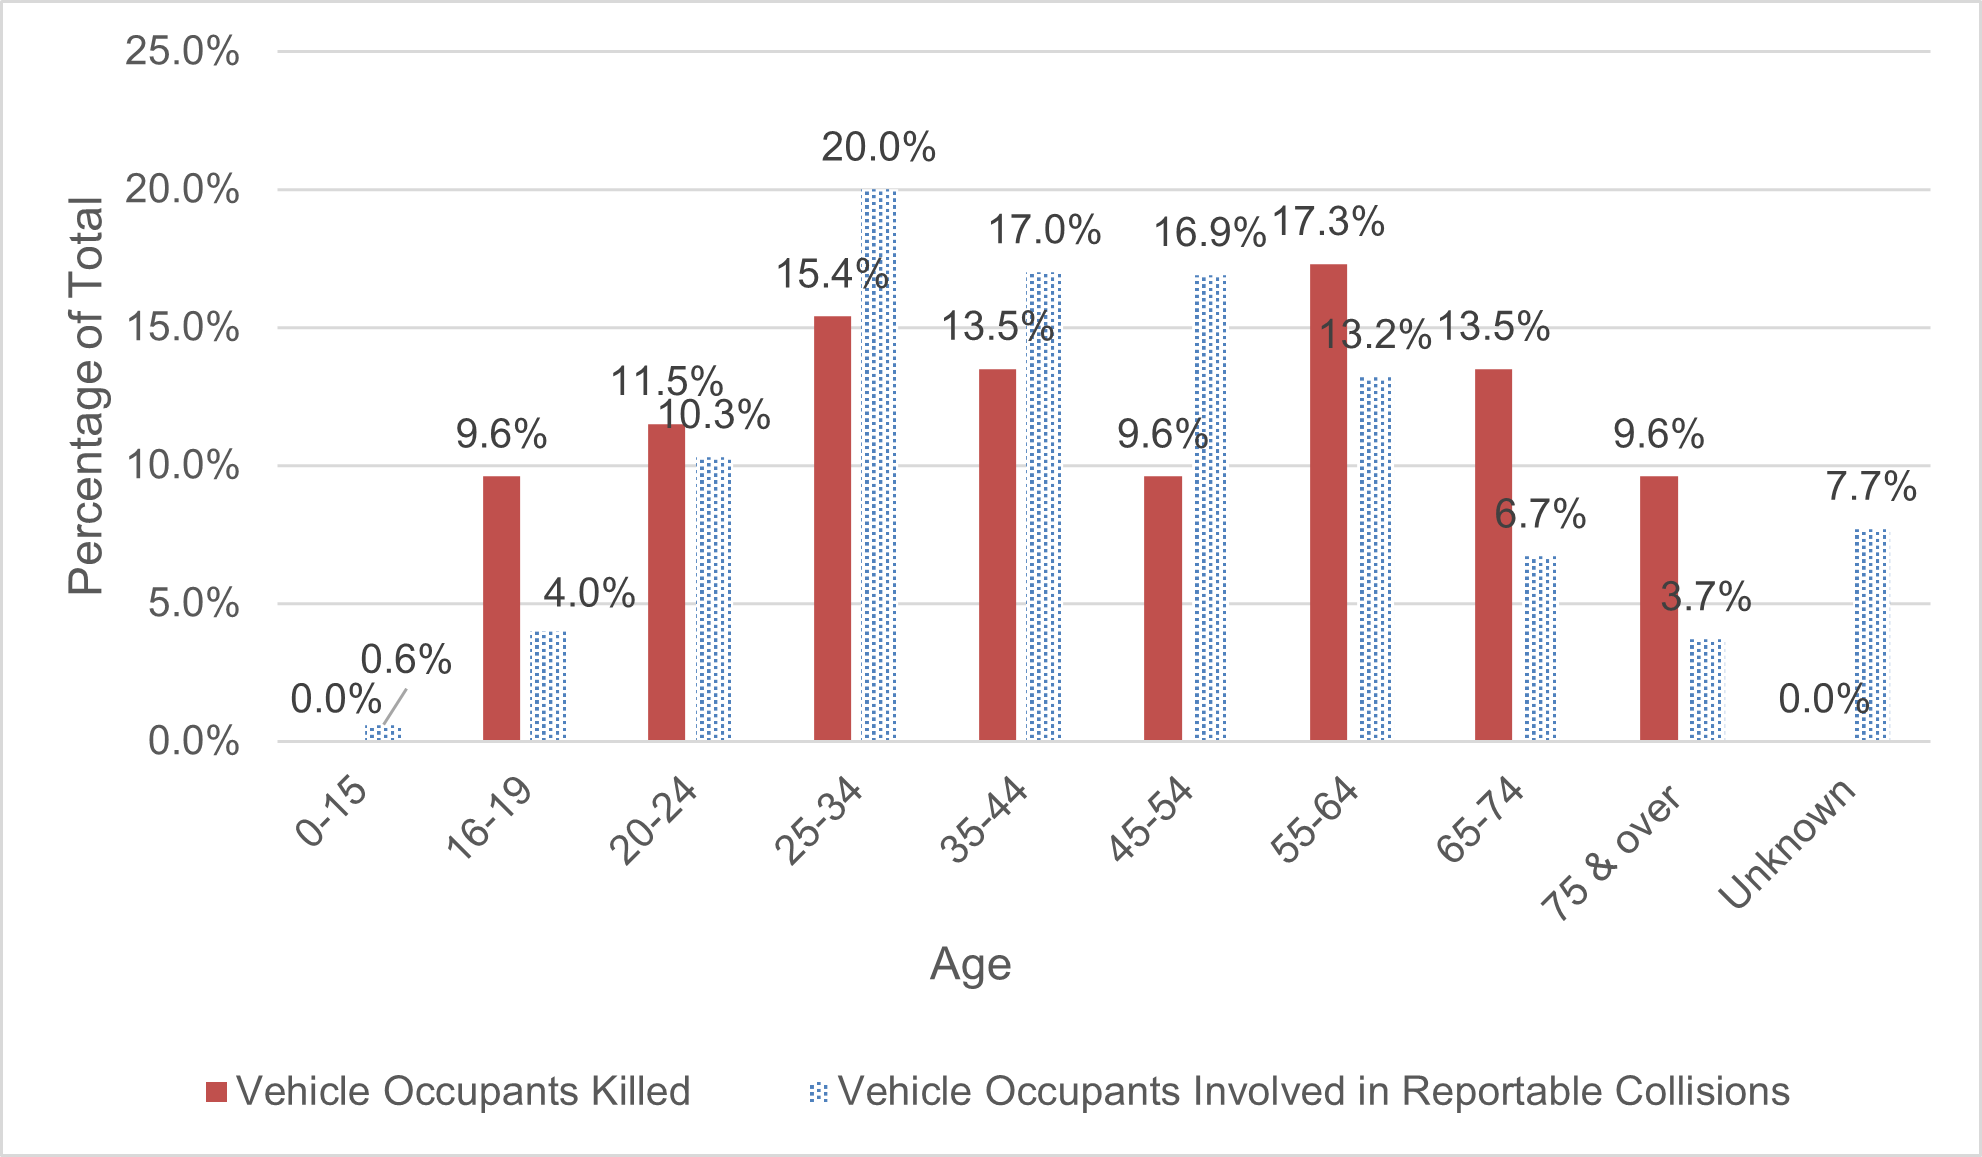 Figure 13 demonstrates the number of vehicle occupants (driver or passenger) killed and the number of vehicle occupants (driver or passenger) involved in reportable collisions according to age category. 